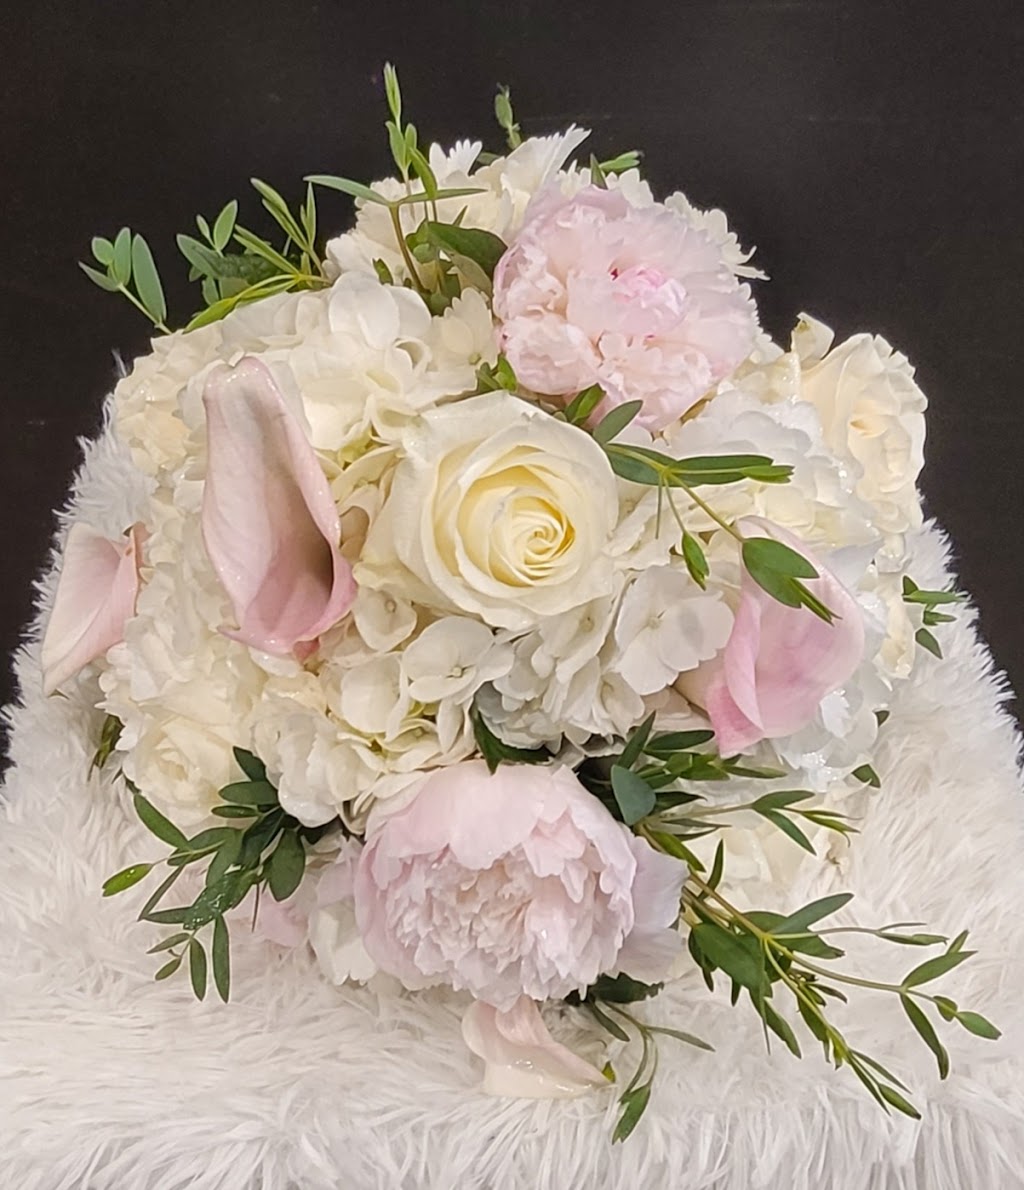 Central Florist | 252 N Central Ave, Valley Stream, NY 11580 | Phone: (516) 825-8449